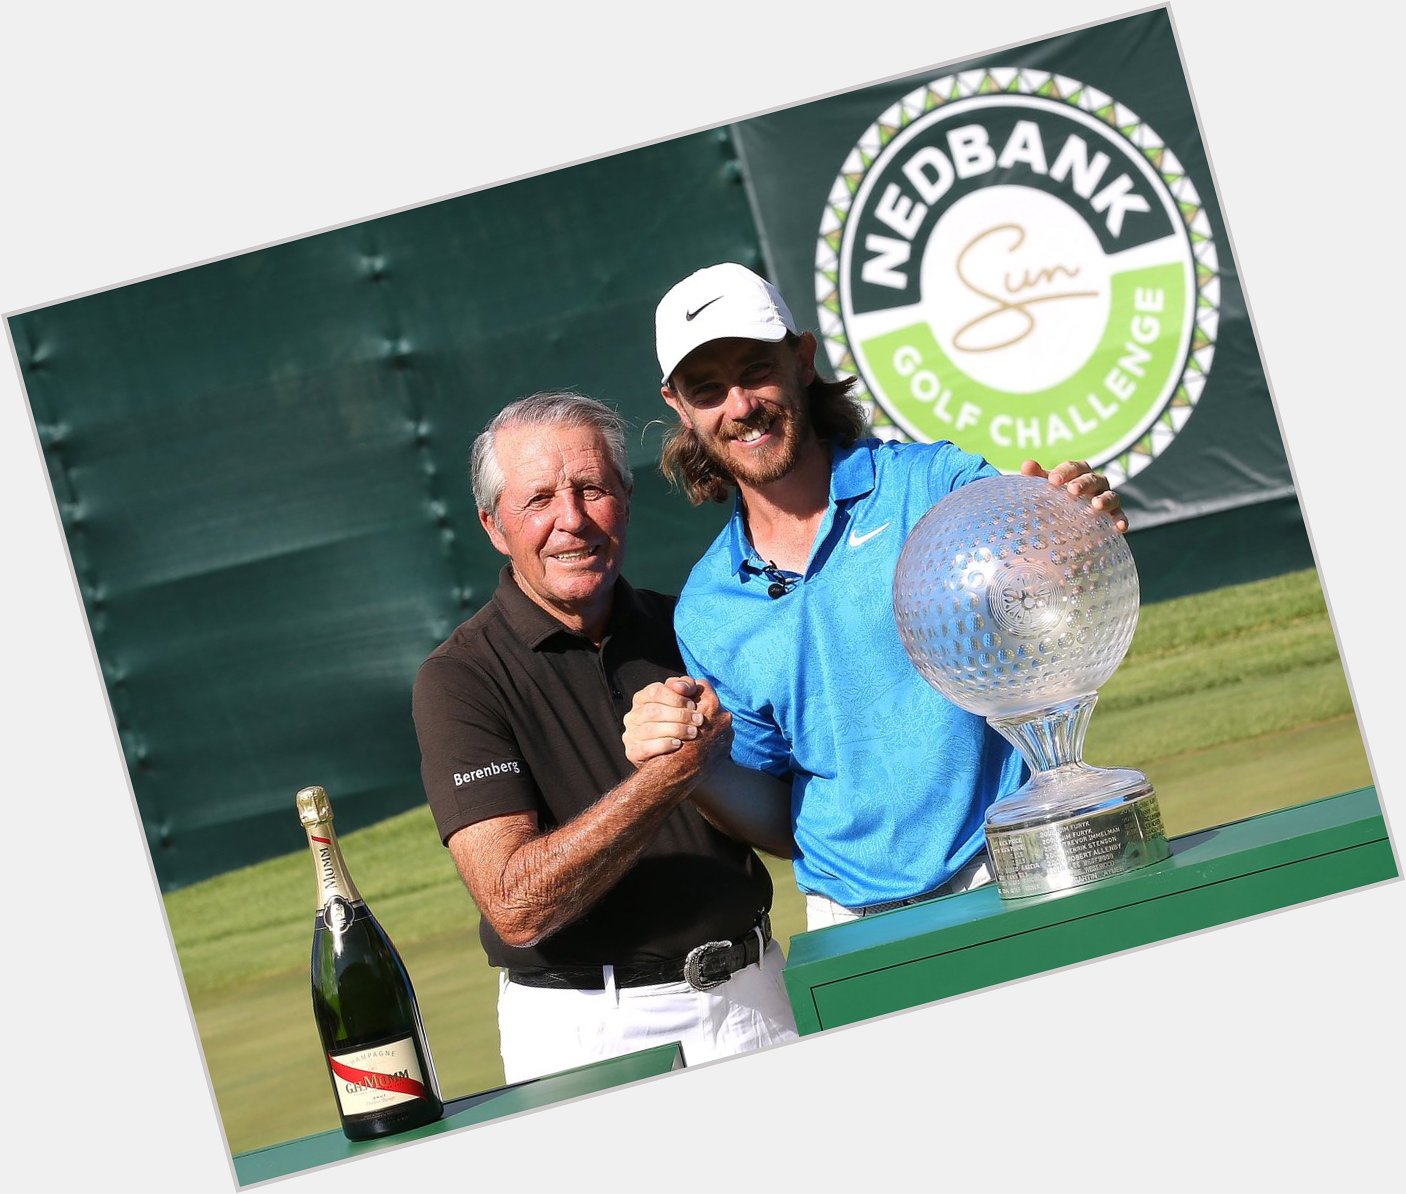 To our tournament host, Gary Player, we wish you a very Happy Birthday!  